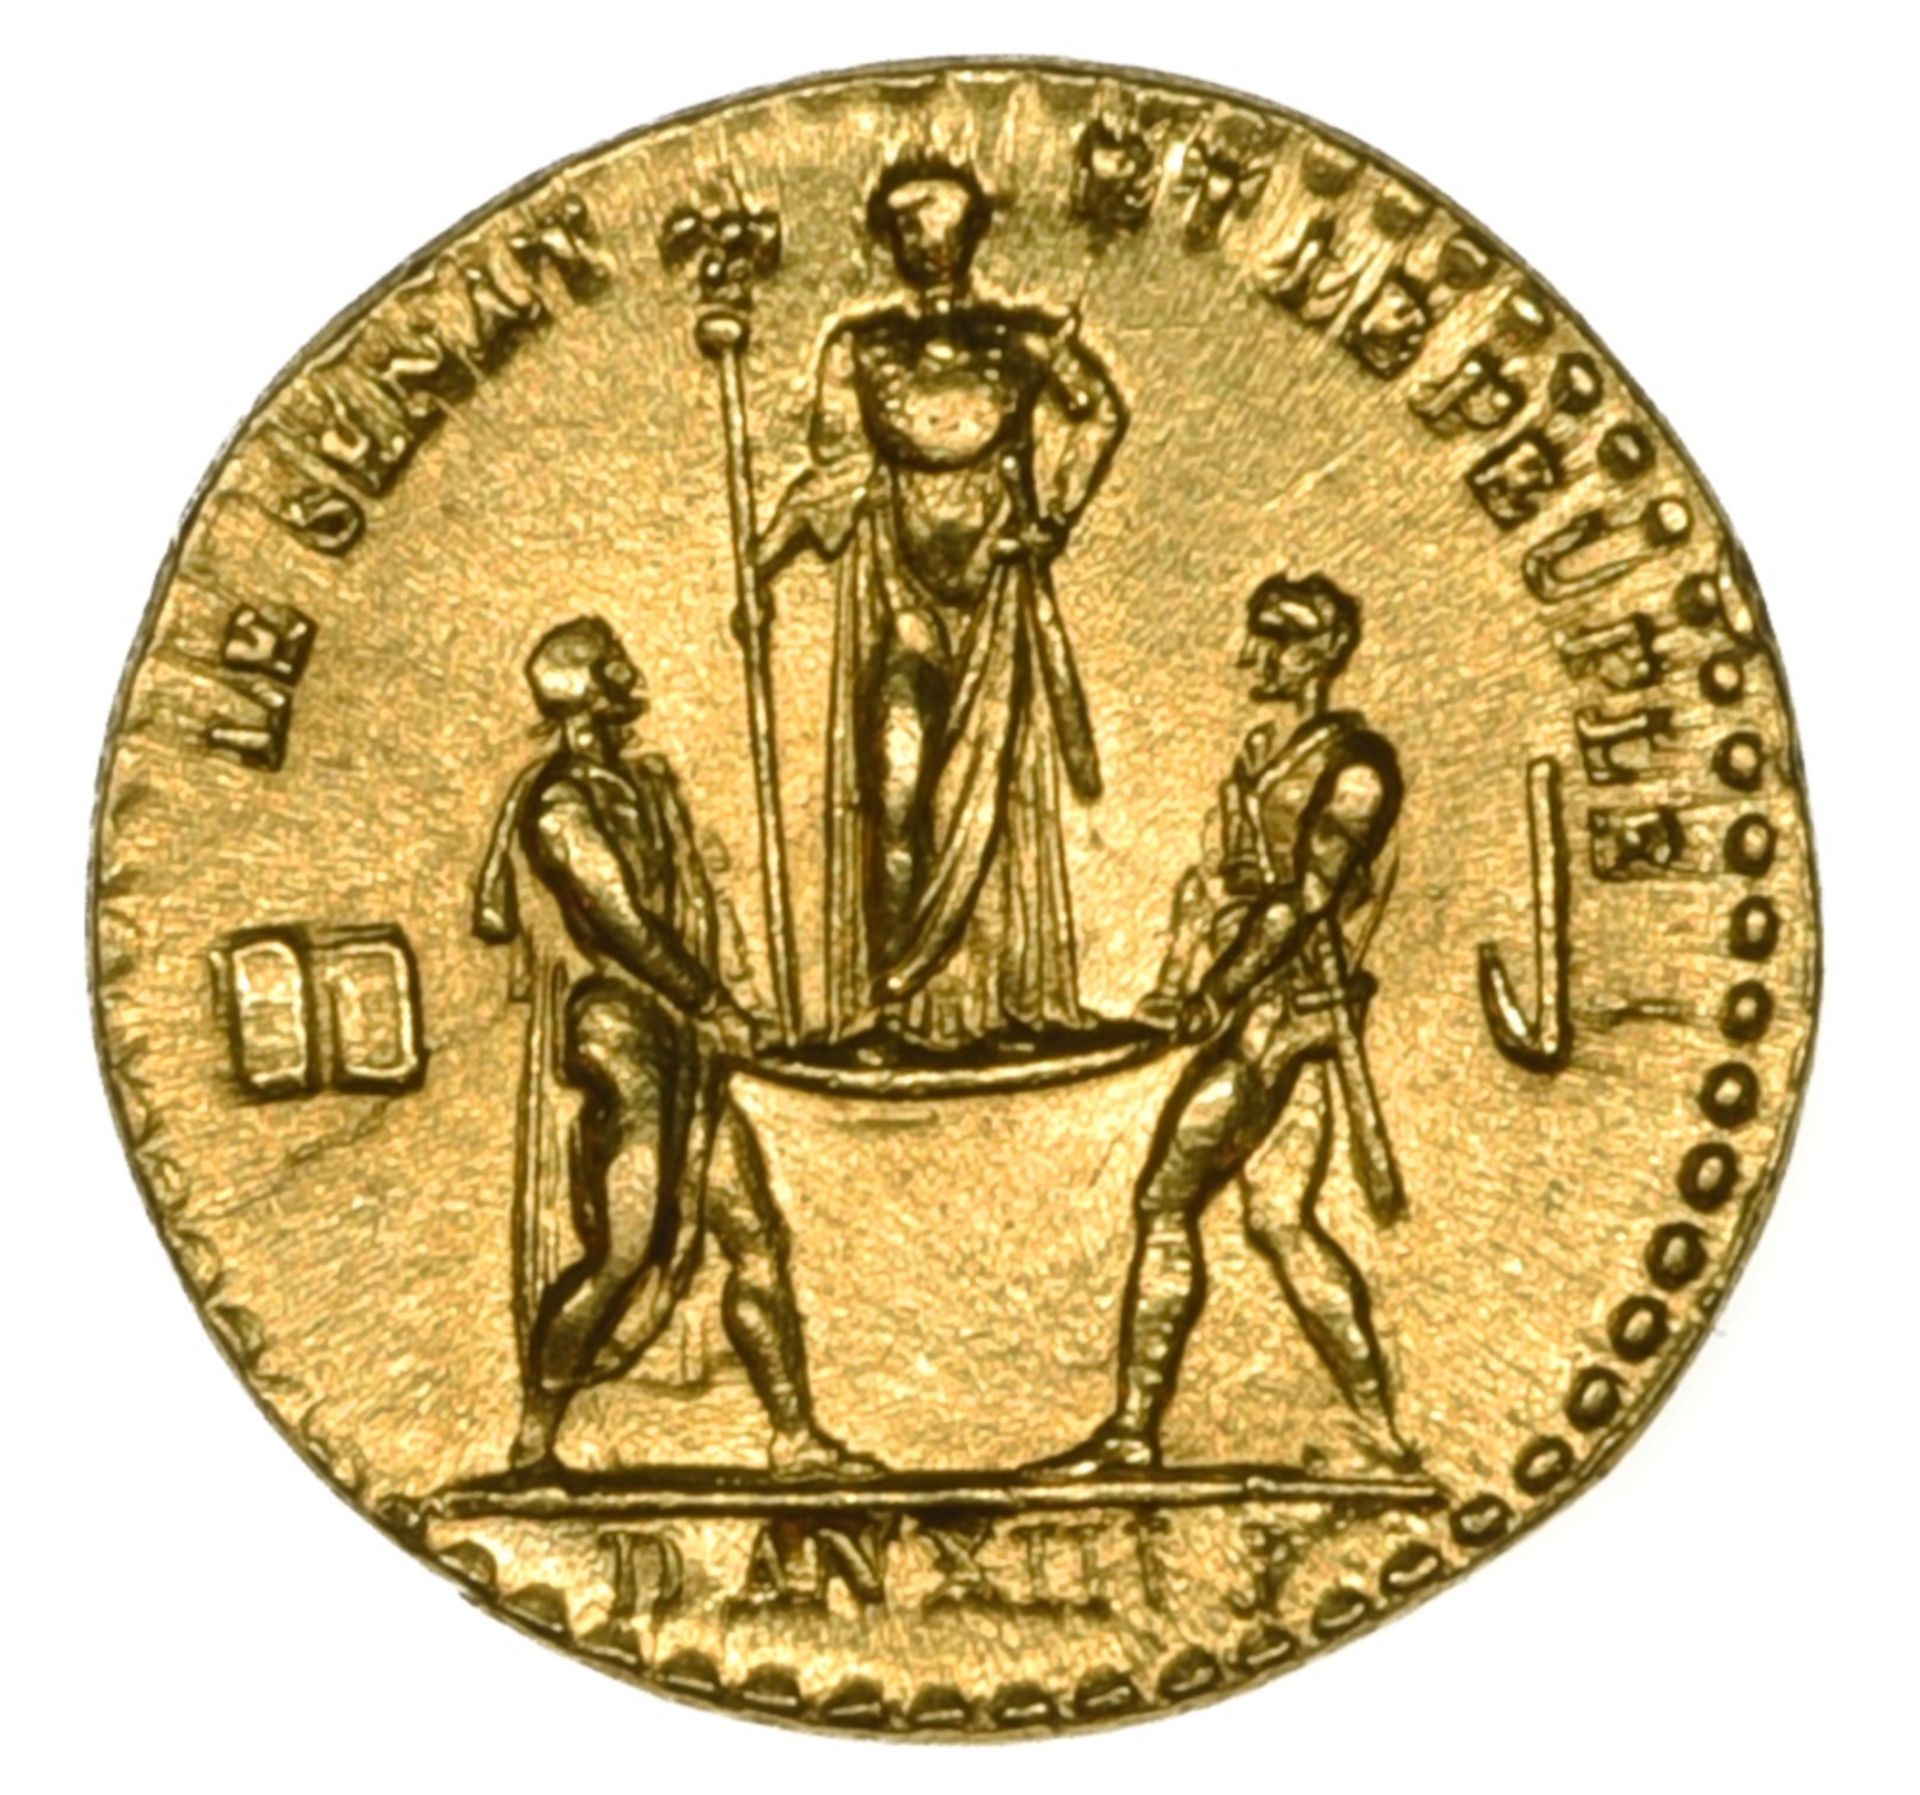 France Napoleon I (1804-1814), small coronation medal, 1.90g, 13mm, in gold, AN XIII, by Denon and - Image 3 of 3